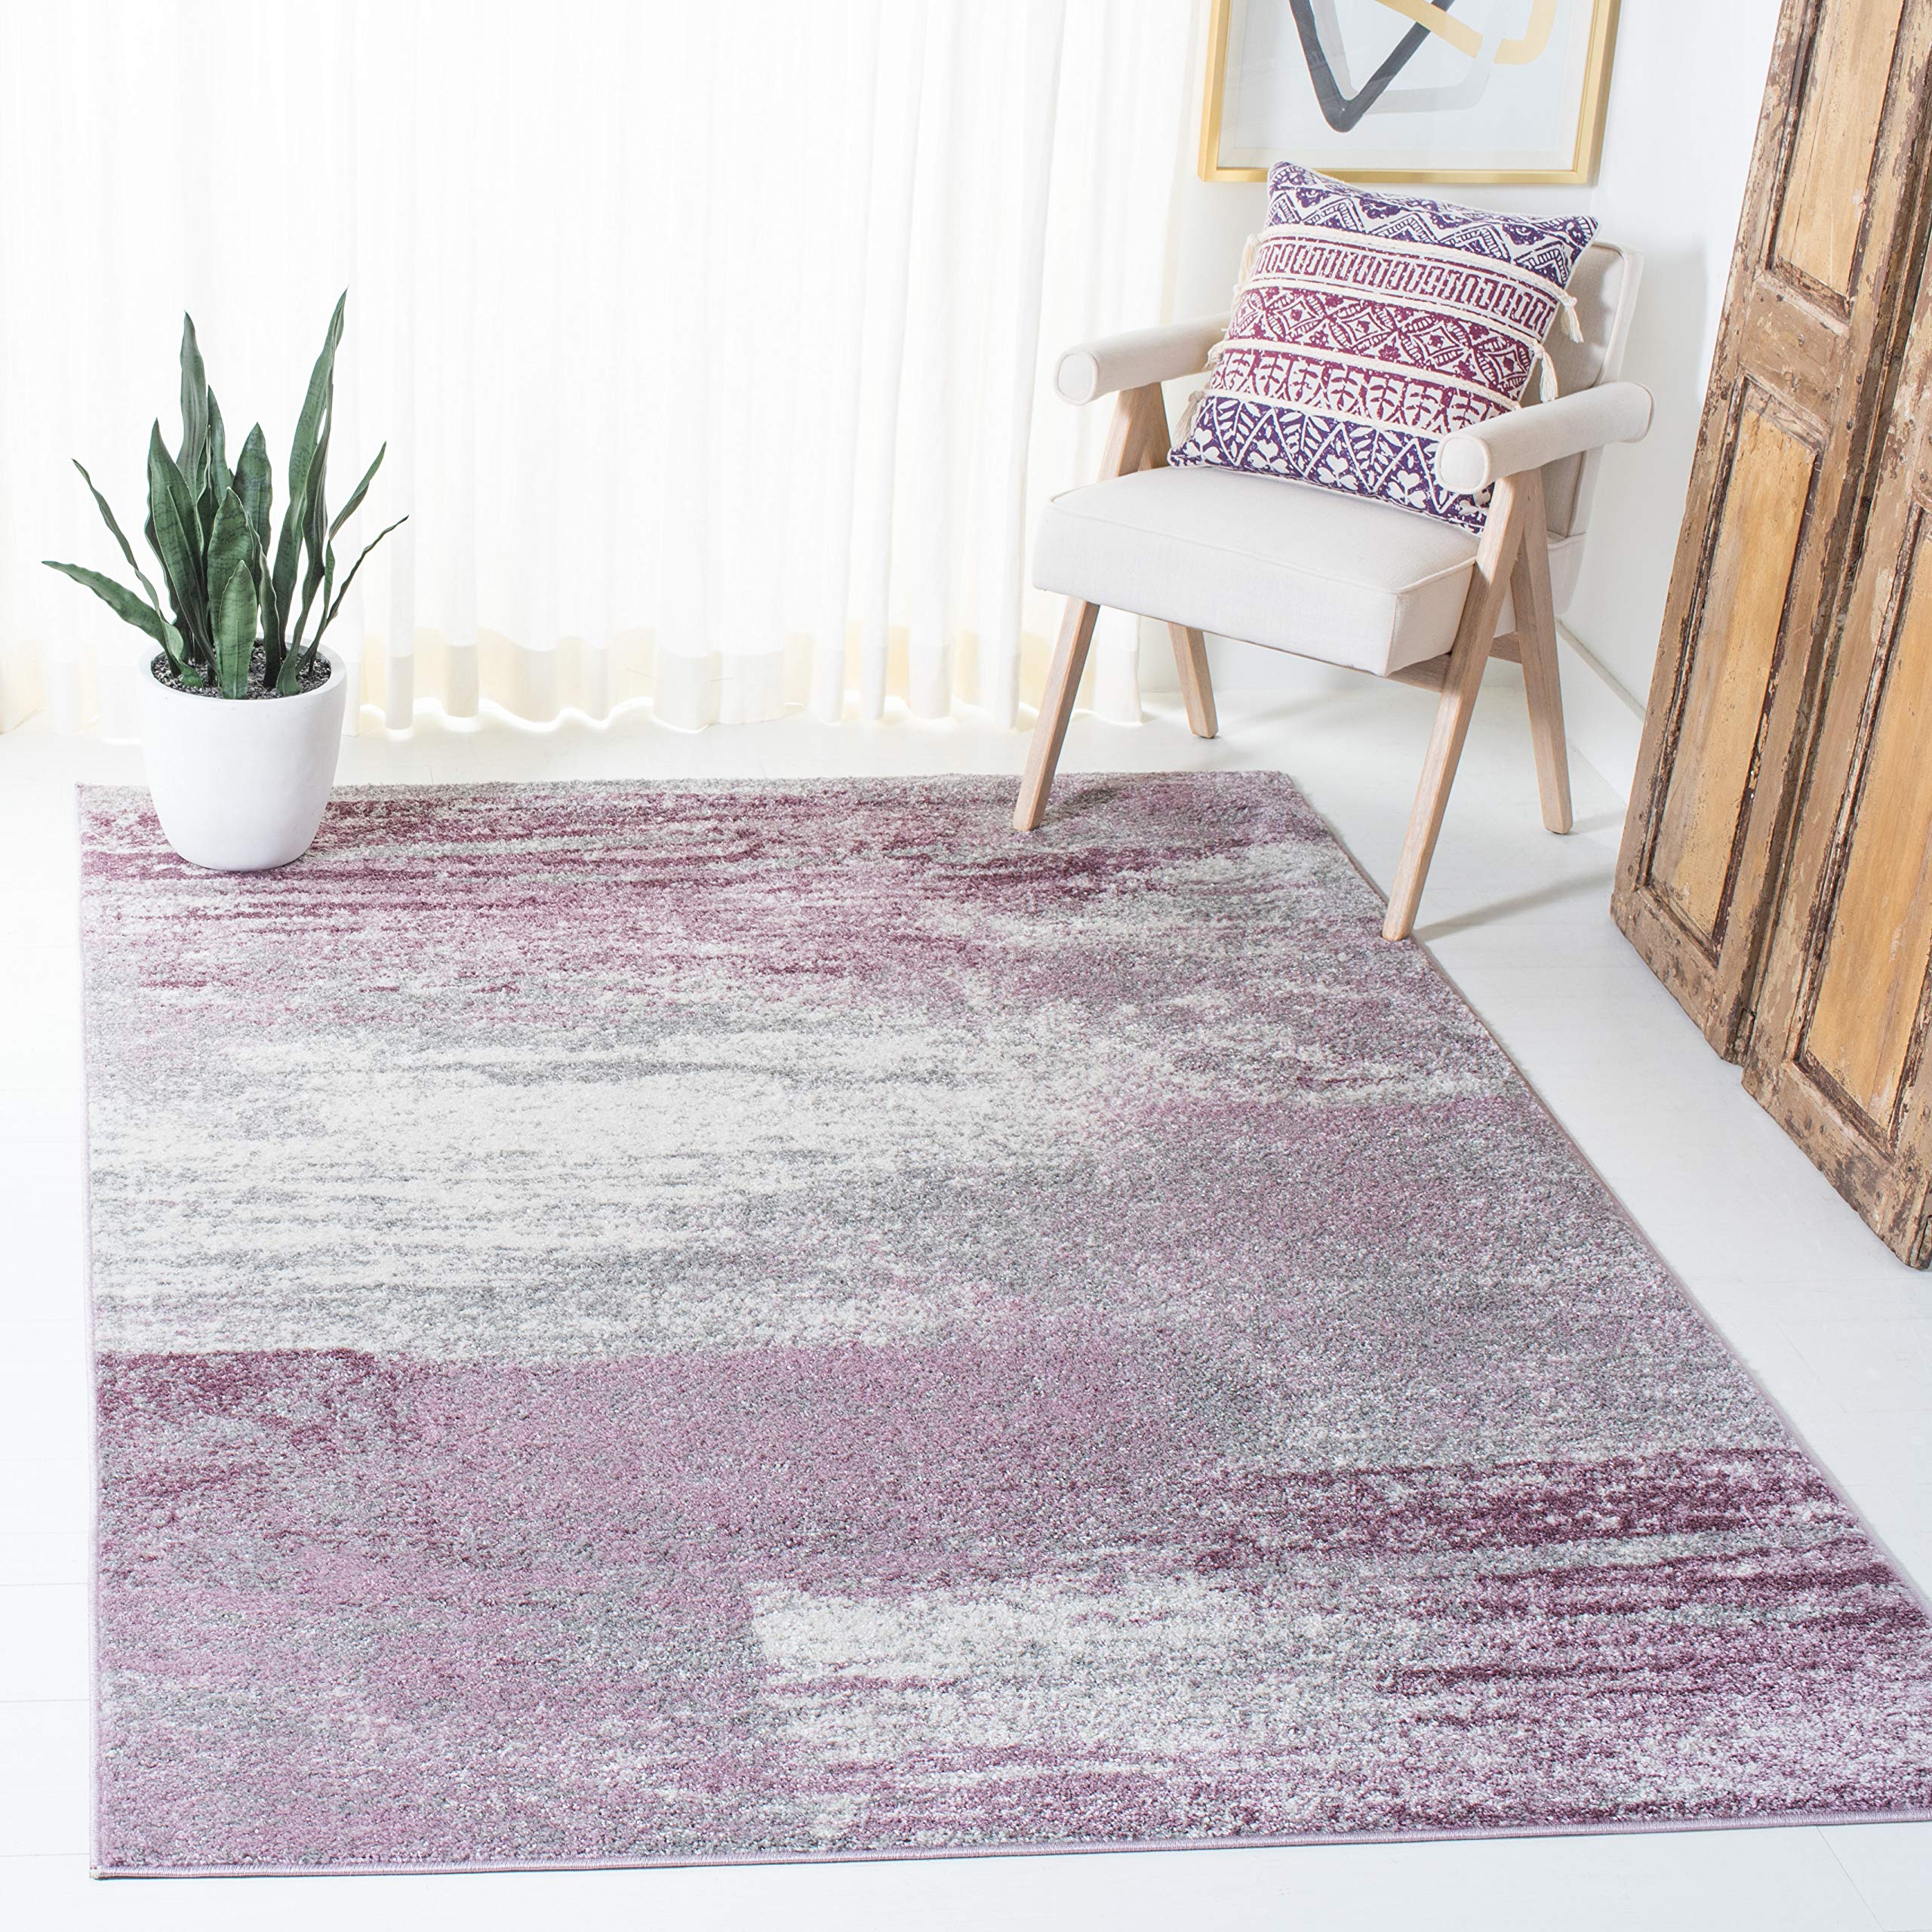 SAFAVIEH Adirondack Collection Accent Rug - 4' x 6', Grey & Purple, Modern Abstract Design, Non-Shedding & Easy Care, Ideal for High Traffic Areas in Entryway, Living Room, Bedroom (ADR112V)